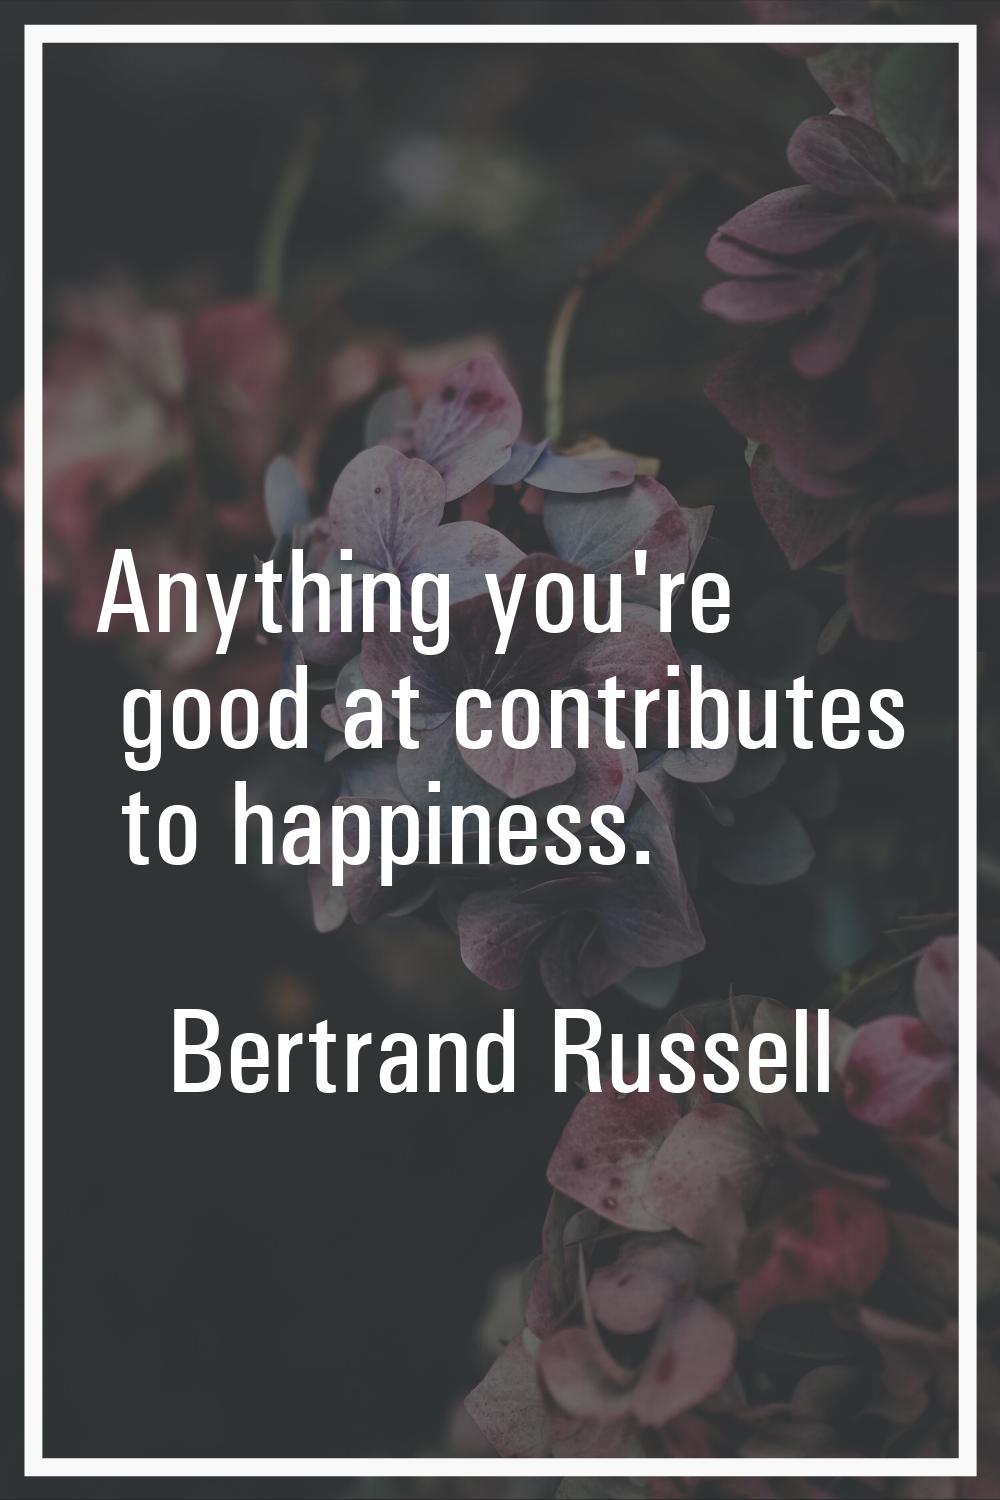 Anything you're good at contributes to happiness.